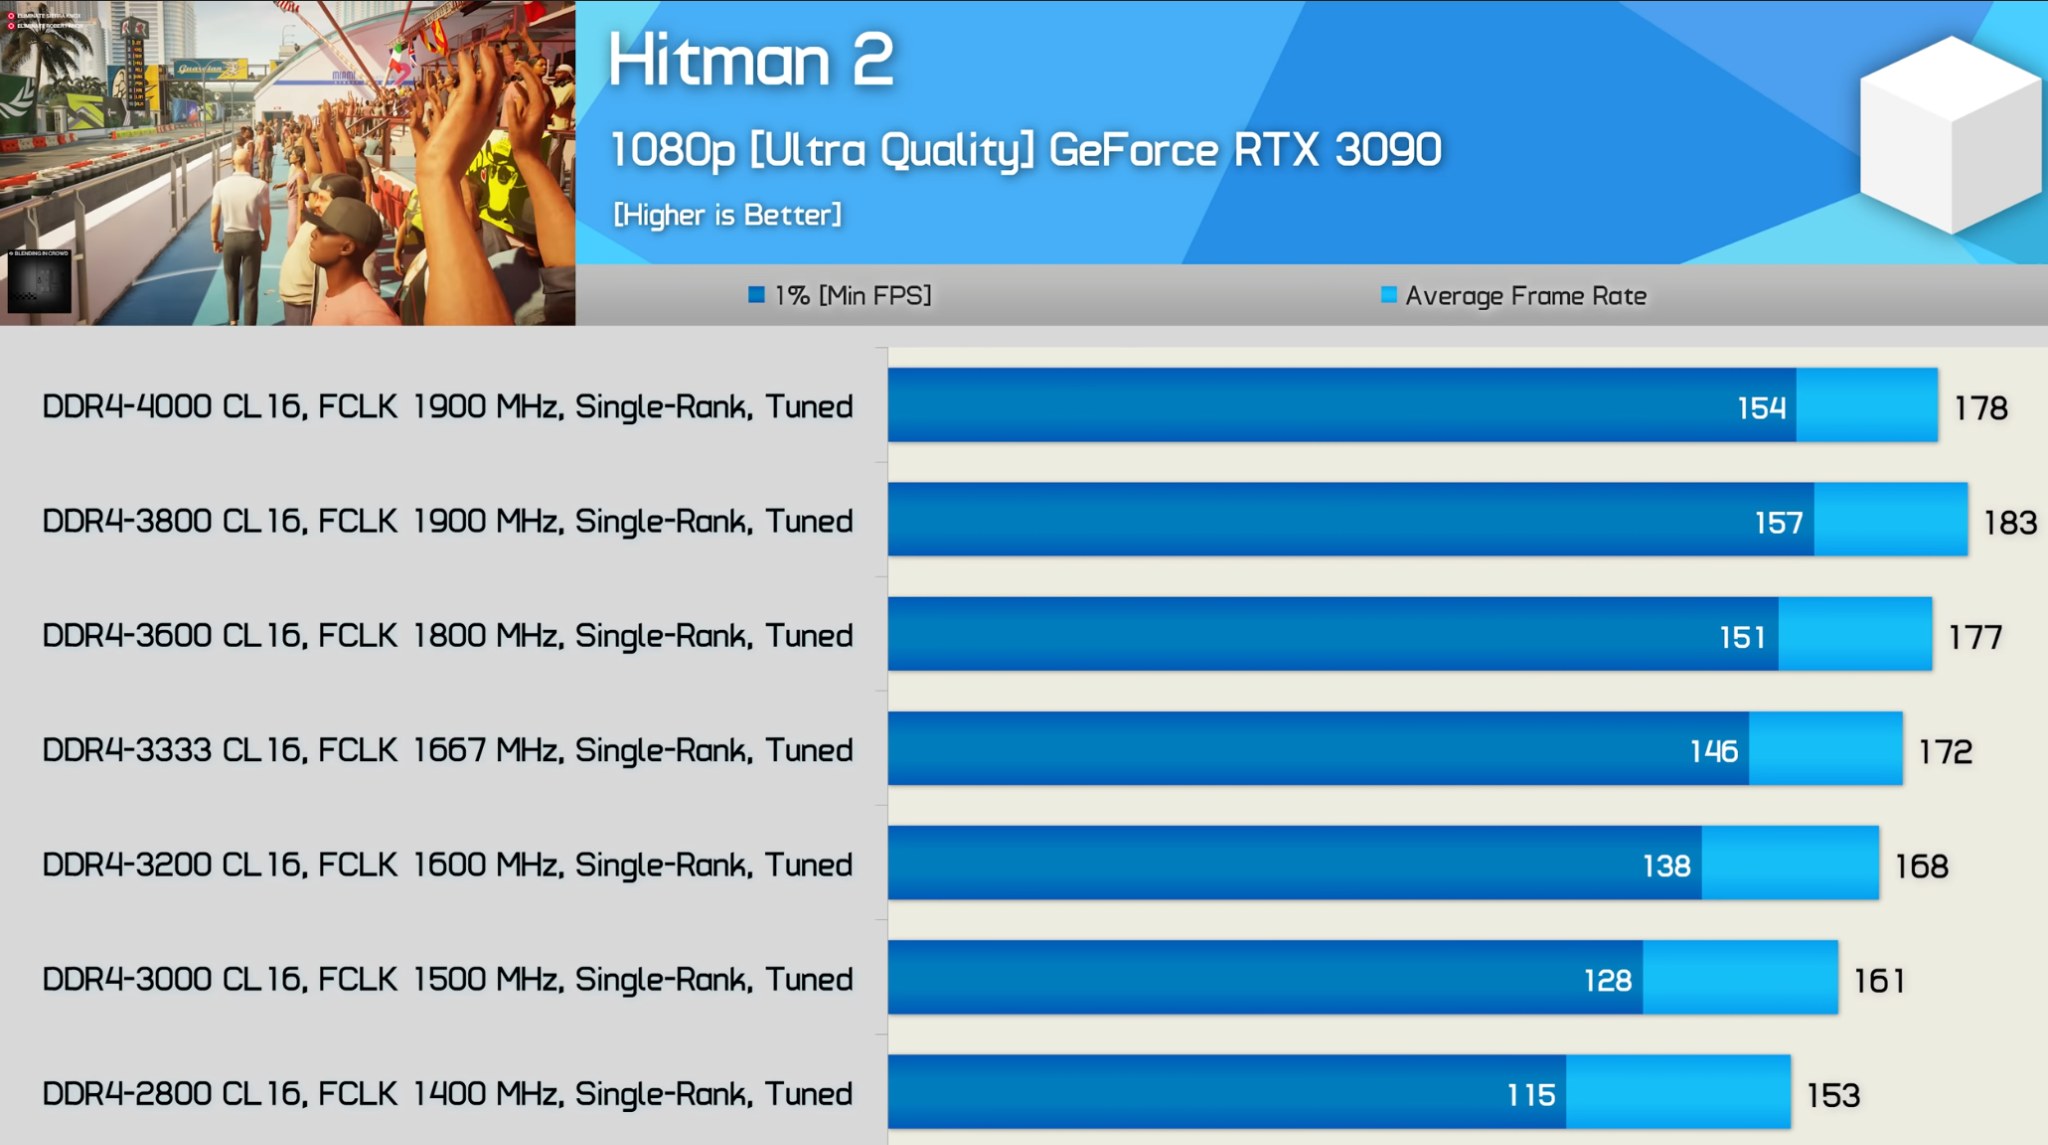 DDR4 benchmark for Hitman 2 at 1080p.